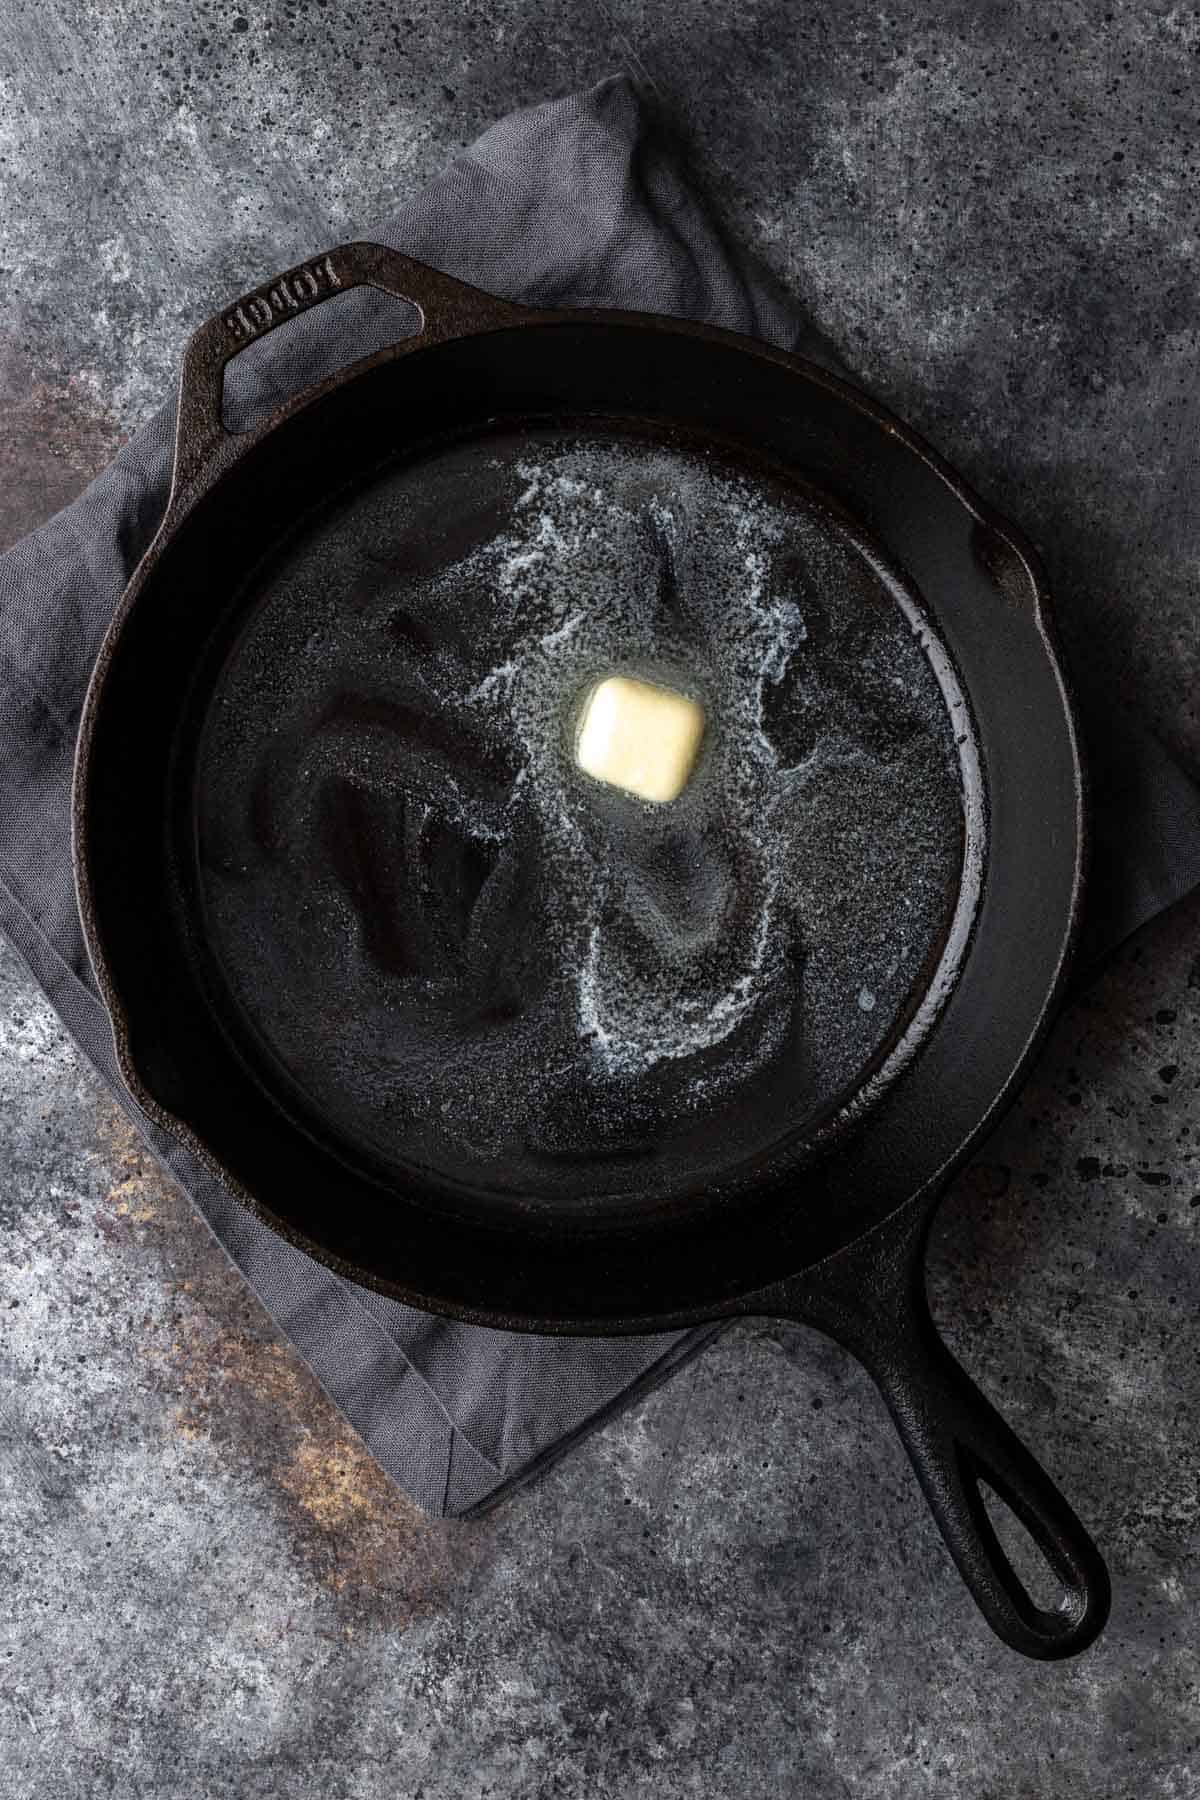 Butter melted in the bottom of a cast iron skillet.